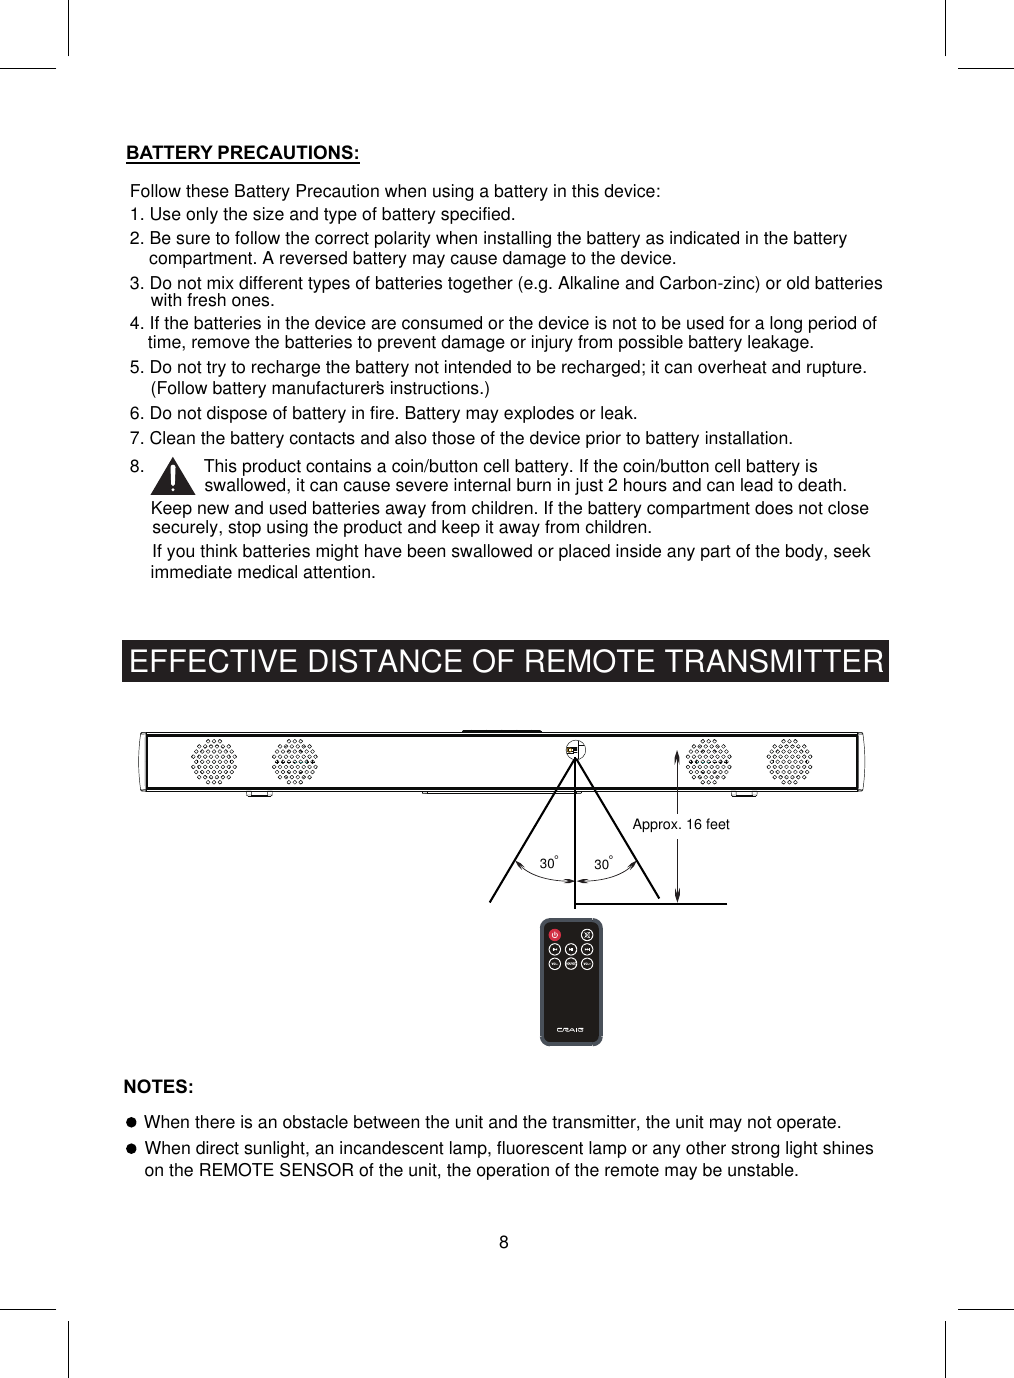 °30 °30Approx. 16 feet8EFFECTIVE DISTANCE OF REMOTE TRANSMITTERWhen there is an obstacle between the unit and the transmitter, the unit may not operate.Follow these Battery Precaution when using a battery in this device:1. Use only the size and type of battery specified.6. Do not dispose of battery in fire. Battery may explodes or leak.7. Clean the battery contacts and also those of the device prior to battery installation.BATTERY PRECAUTIONS:2. Be sure to follow the correct polarity when installing the battery as indicated in the battery compartment. A reversed battery may cause damage to the device.3. Do not mix different types of batteries together (e.g. Alkaline and Carbon-zinc) or old batteries with fresh ones.4. If the batteries in the device are consumed or the device is not to be used for a long period of time, remove the batteries to prevent damage or injury from possible battery leakage.5. Do not try to recharge the battery not intended to be recharged; it can overheat and rupture. (Follow battery manufacturer’s instructions.)8.            This product contains a coin/button cell battery. If the coin/button cell battery is swallowed, it can cause severe internal burn in just 2 hours and can lead to death.Keep new and used batteries away from children. If the battery compartment does not closesecurely, stop using the product and keep it away from children.If you think batteries might have been swallowed or placed inside any part of the body, seek immediate medical attention.NOTES:When direct sunlight, an incandescent lamp, fluorescent lamp or any other strong light shineson the REMOTE SENSOR of the unit, the operation of the remote may be unstable.